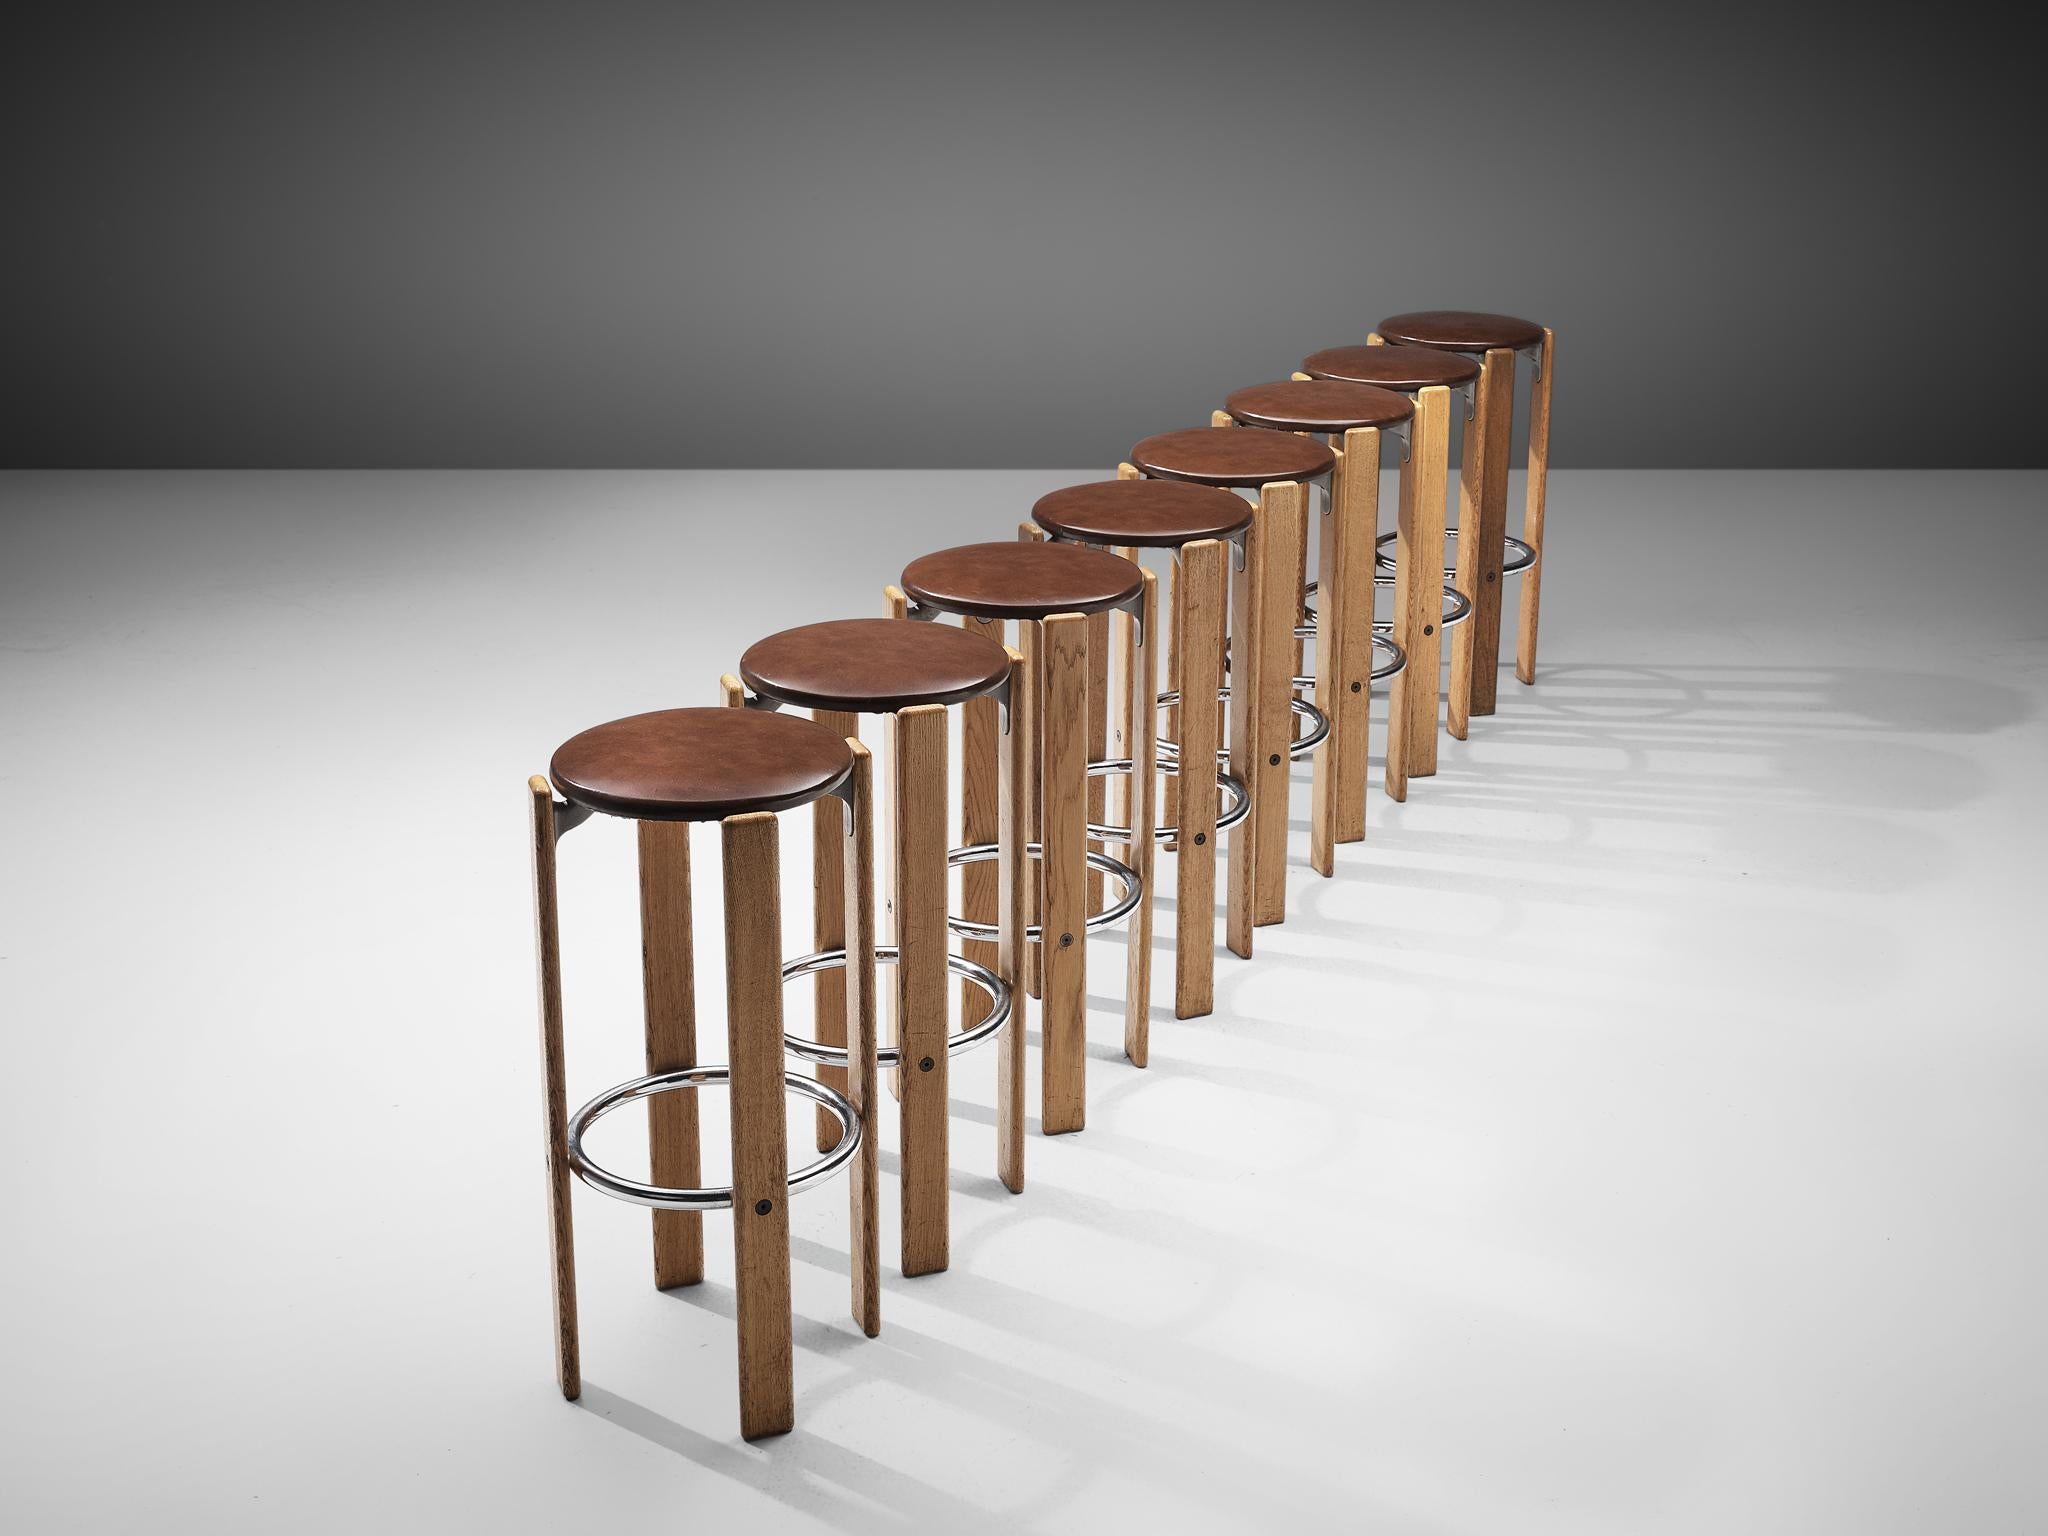 Bruno Rey for Dietiker, set of 8 bar stools, birch, leatherette and metal, Switzerland, 1970s.

This set of eight functionalist barstools is an iconic design by Bruno Rey. Characteristic steel brackets support the leatherette upholstered round